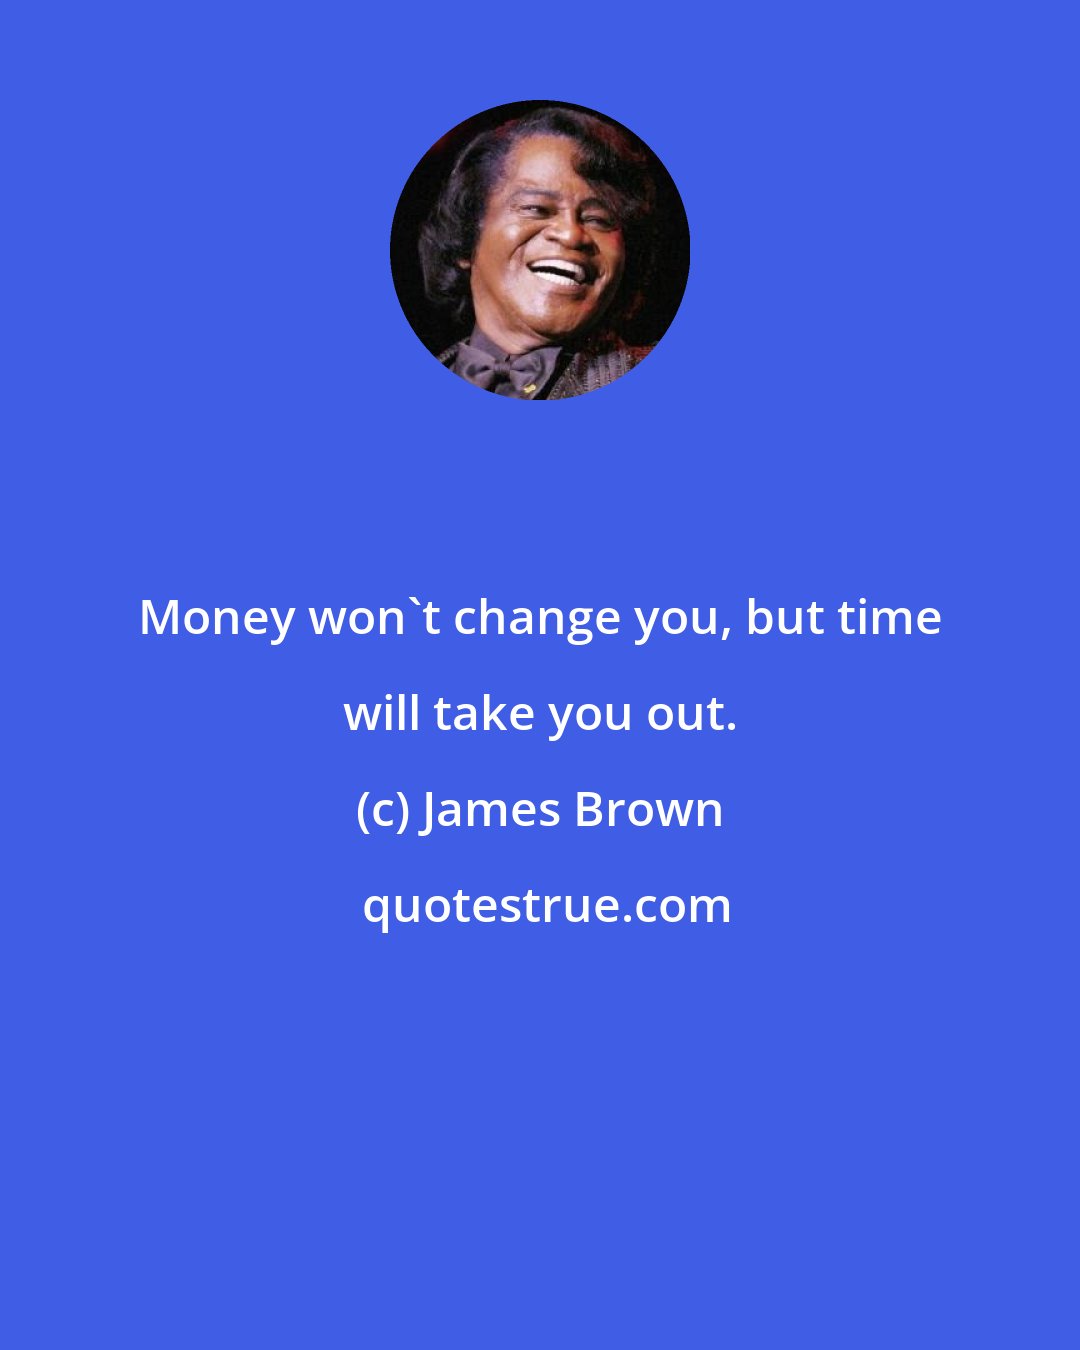 James Brown: Money won't change you, but time will take you out.